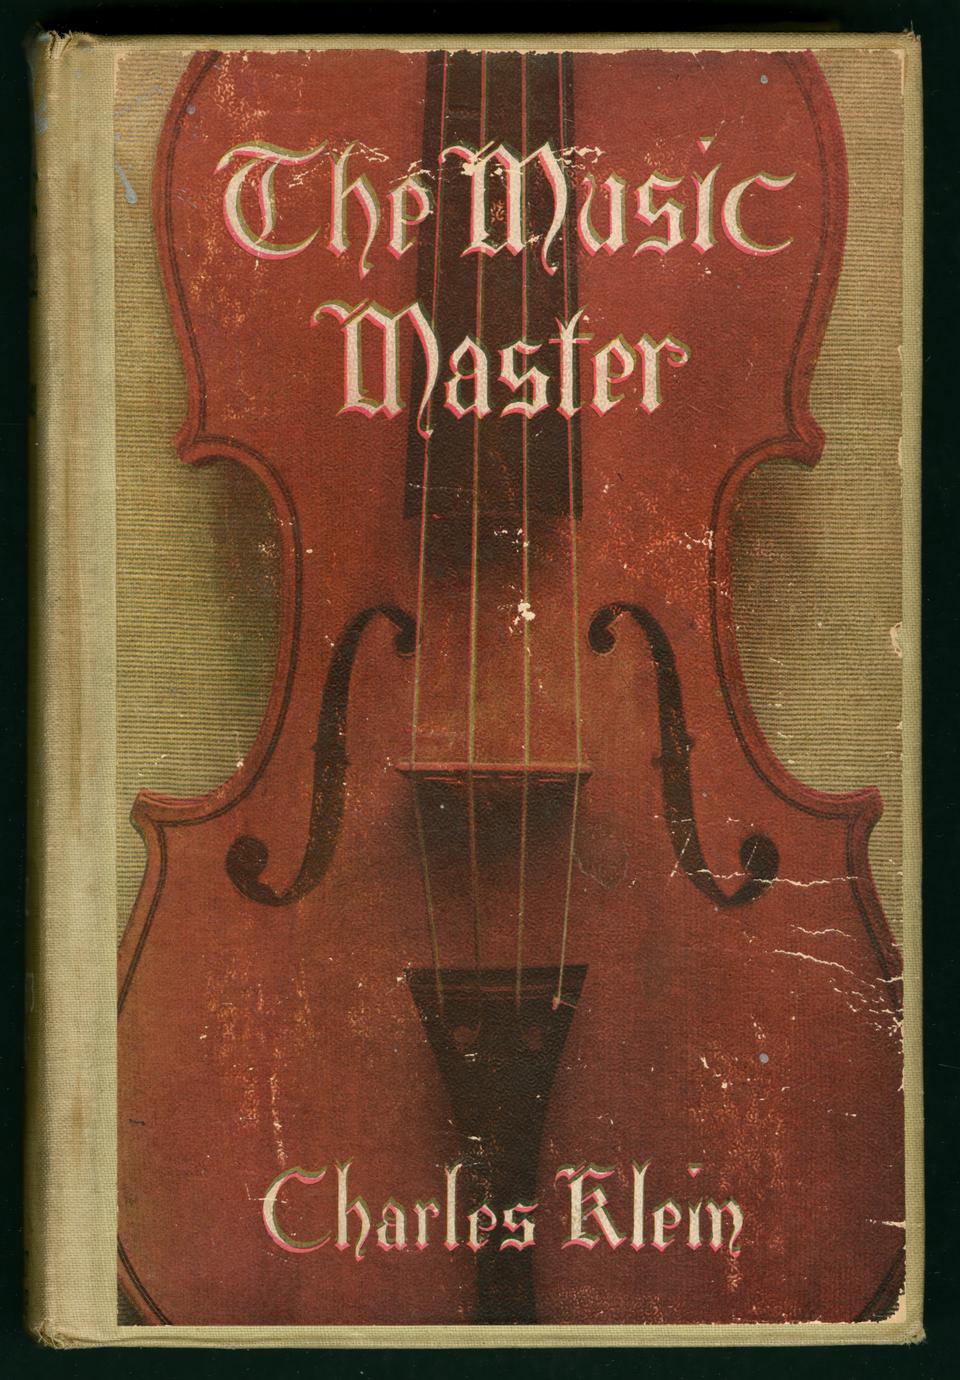 The music master (1 of 2)